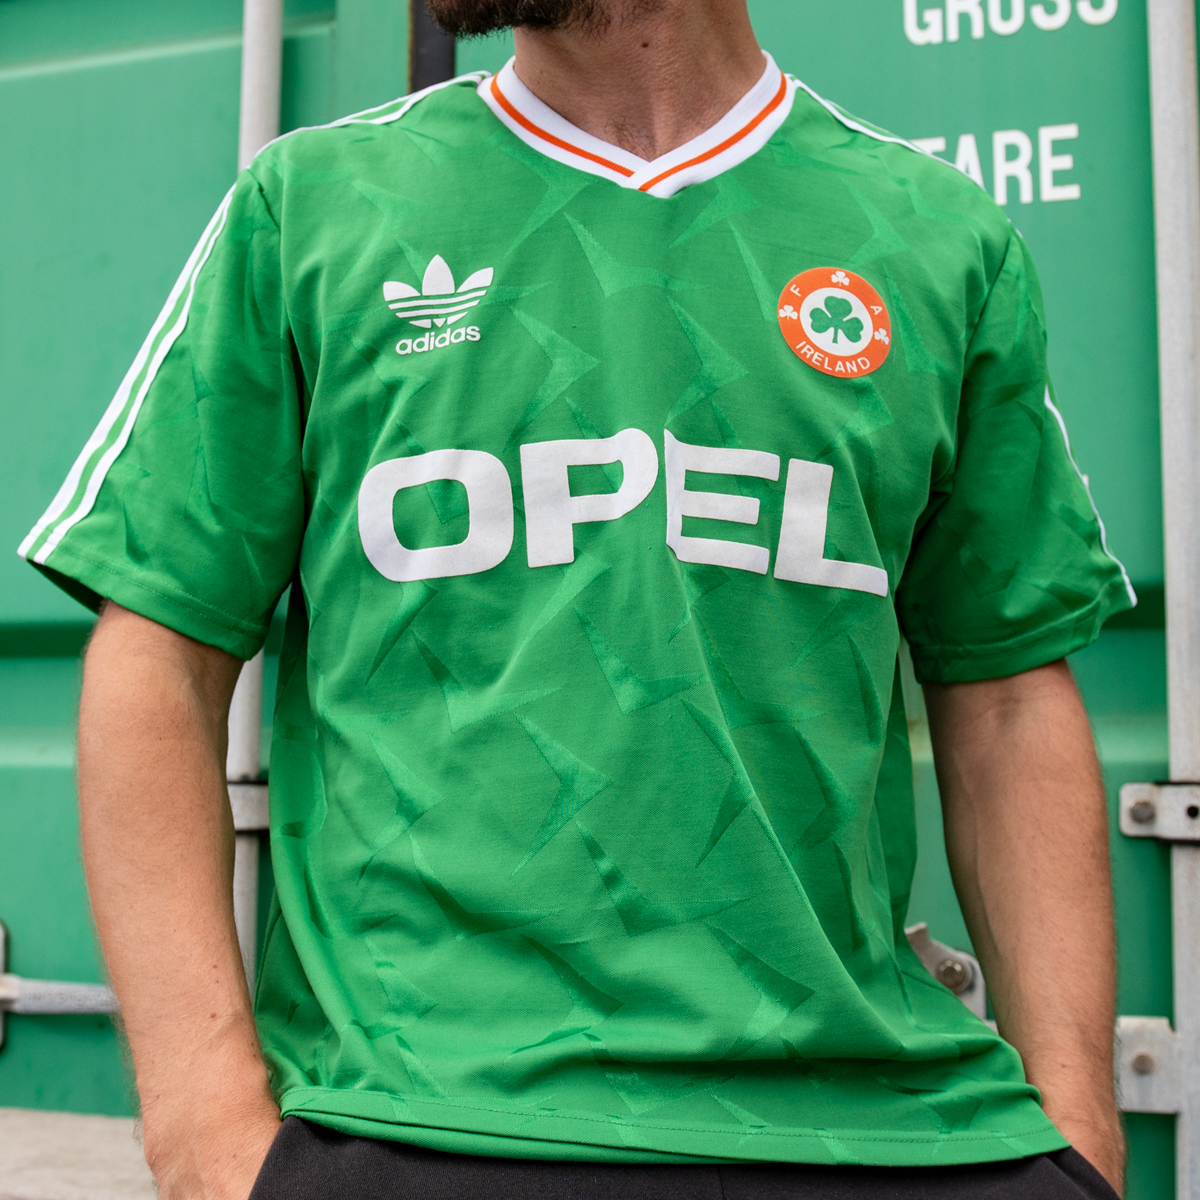 Football Shirts on "Ireland 1990 Home by Adidas 🇮🇪 Glorious home shirt worn at the World Cup where they the Quarter Finals. Hitting the site on August 11th